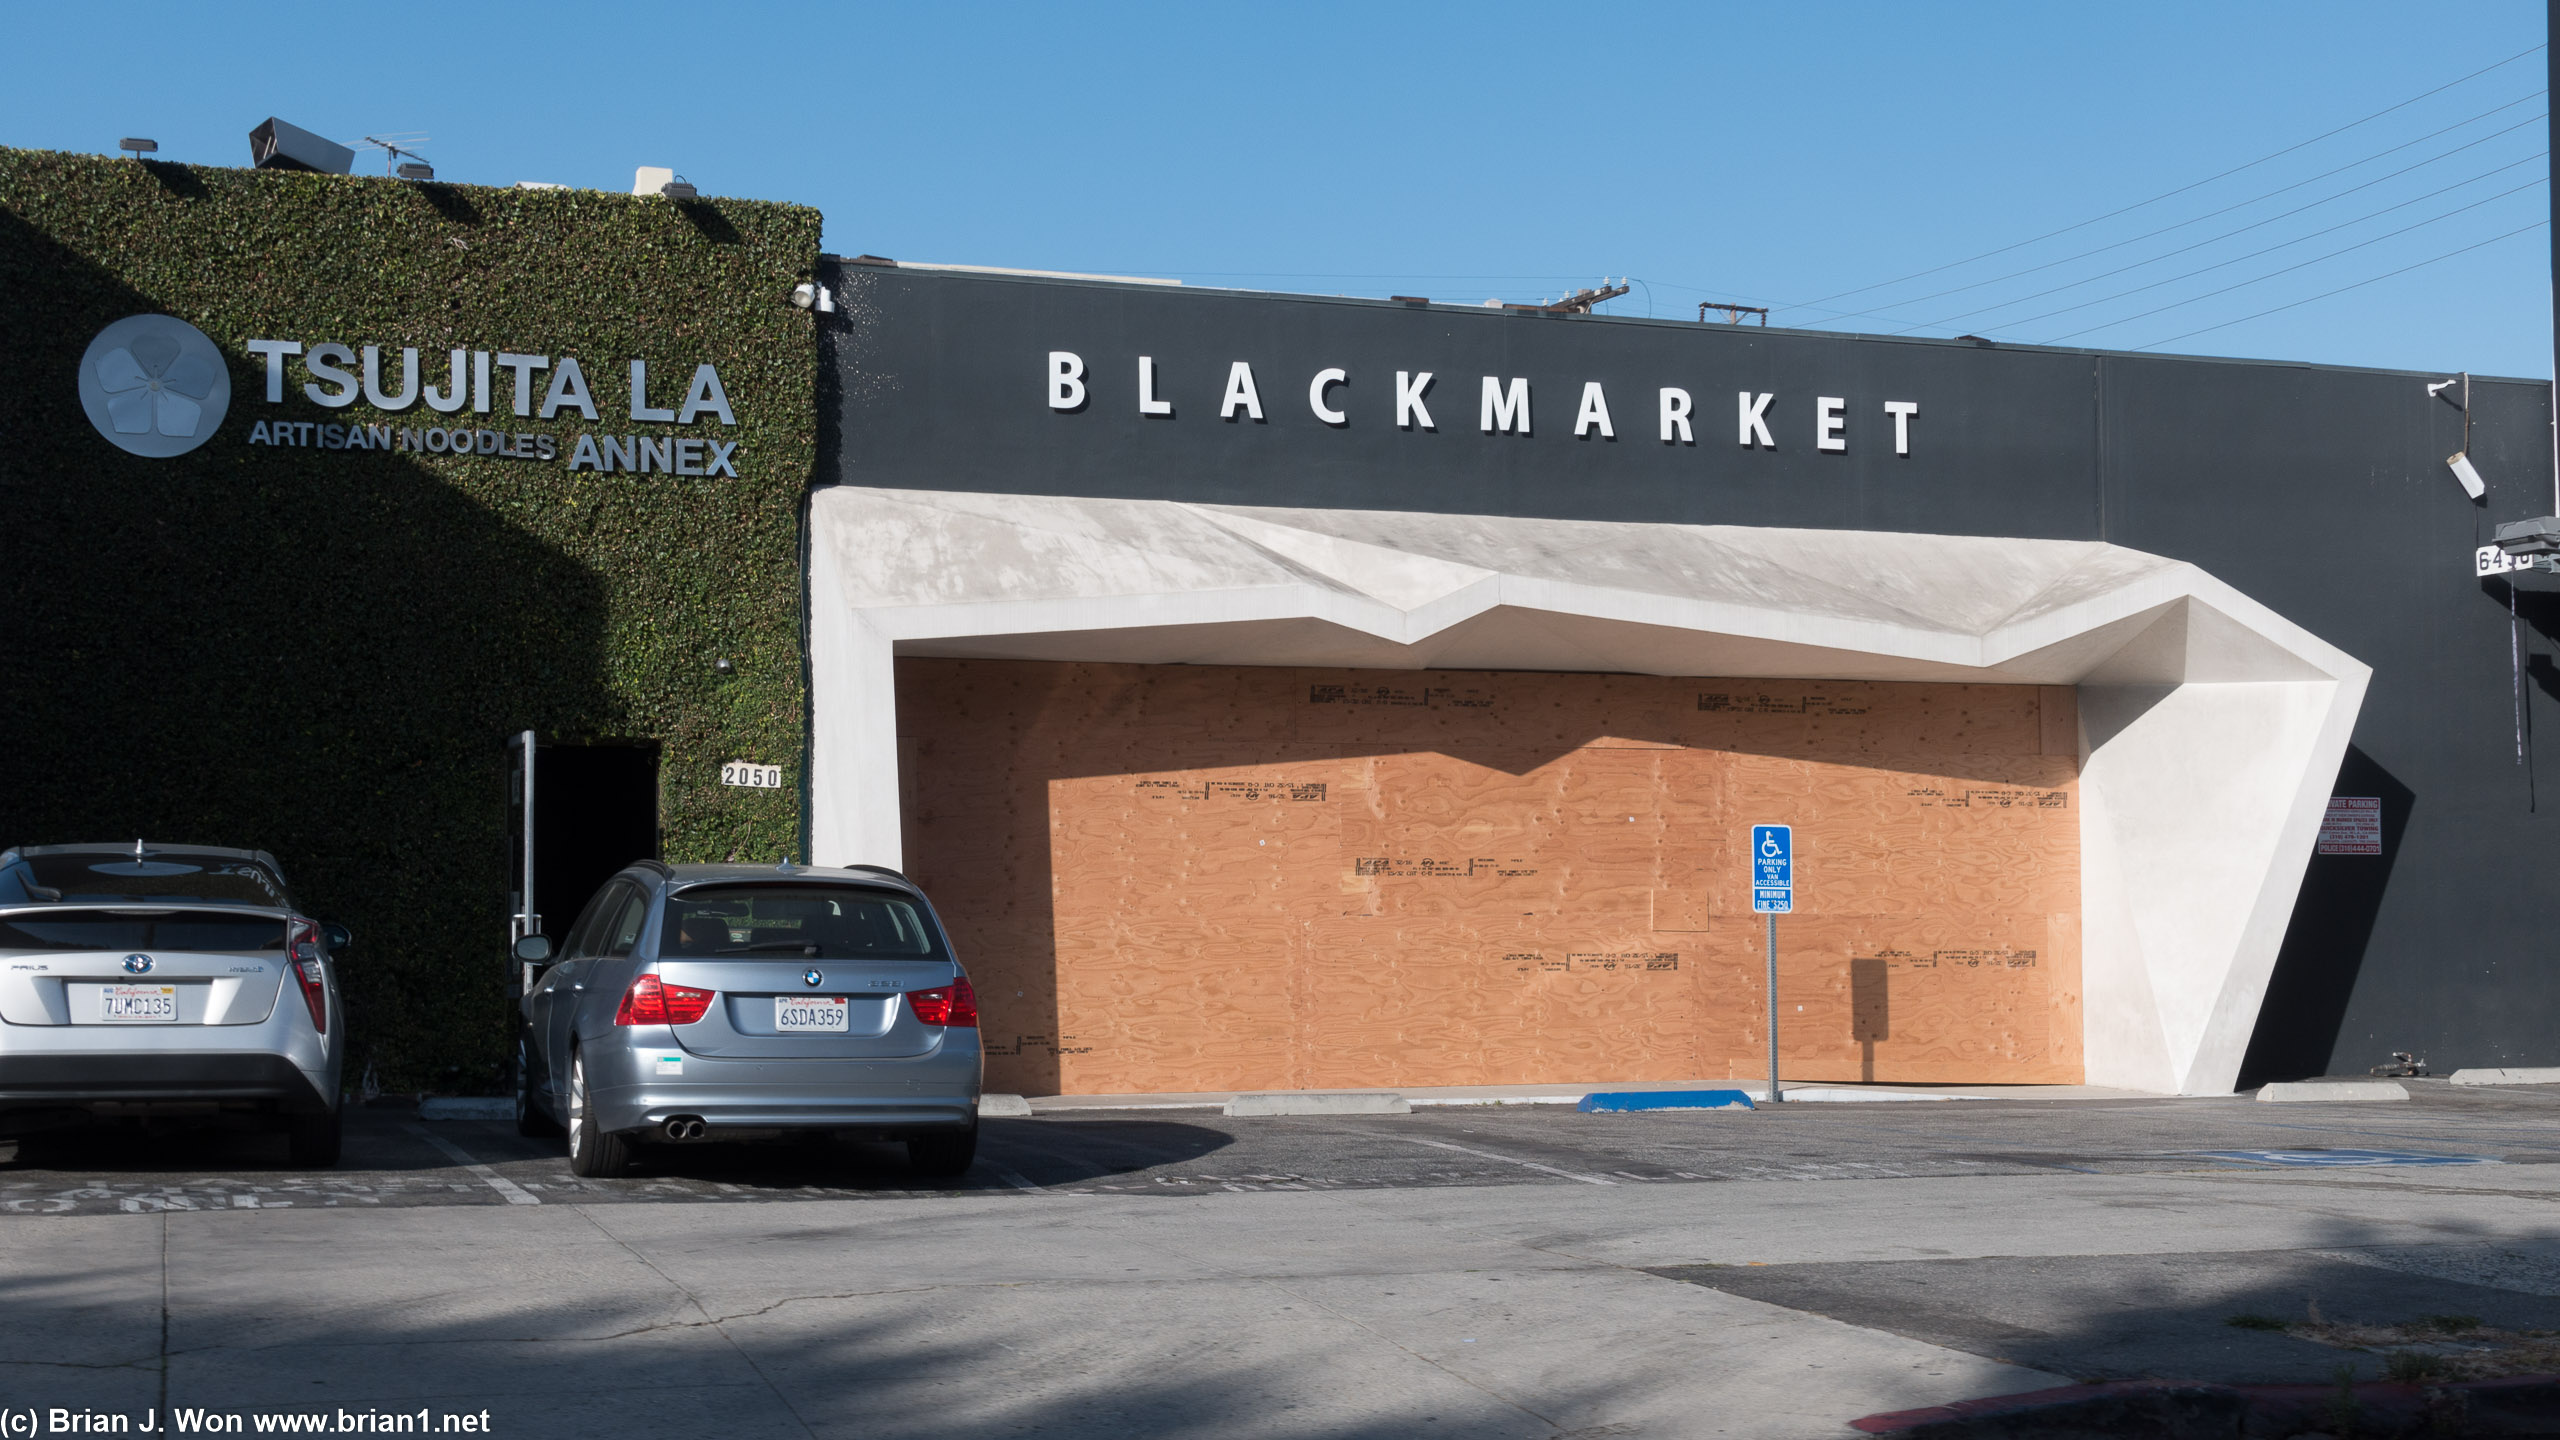 Blackmarket is fully boarded up.